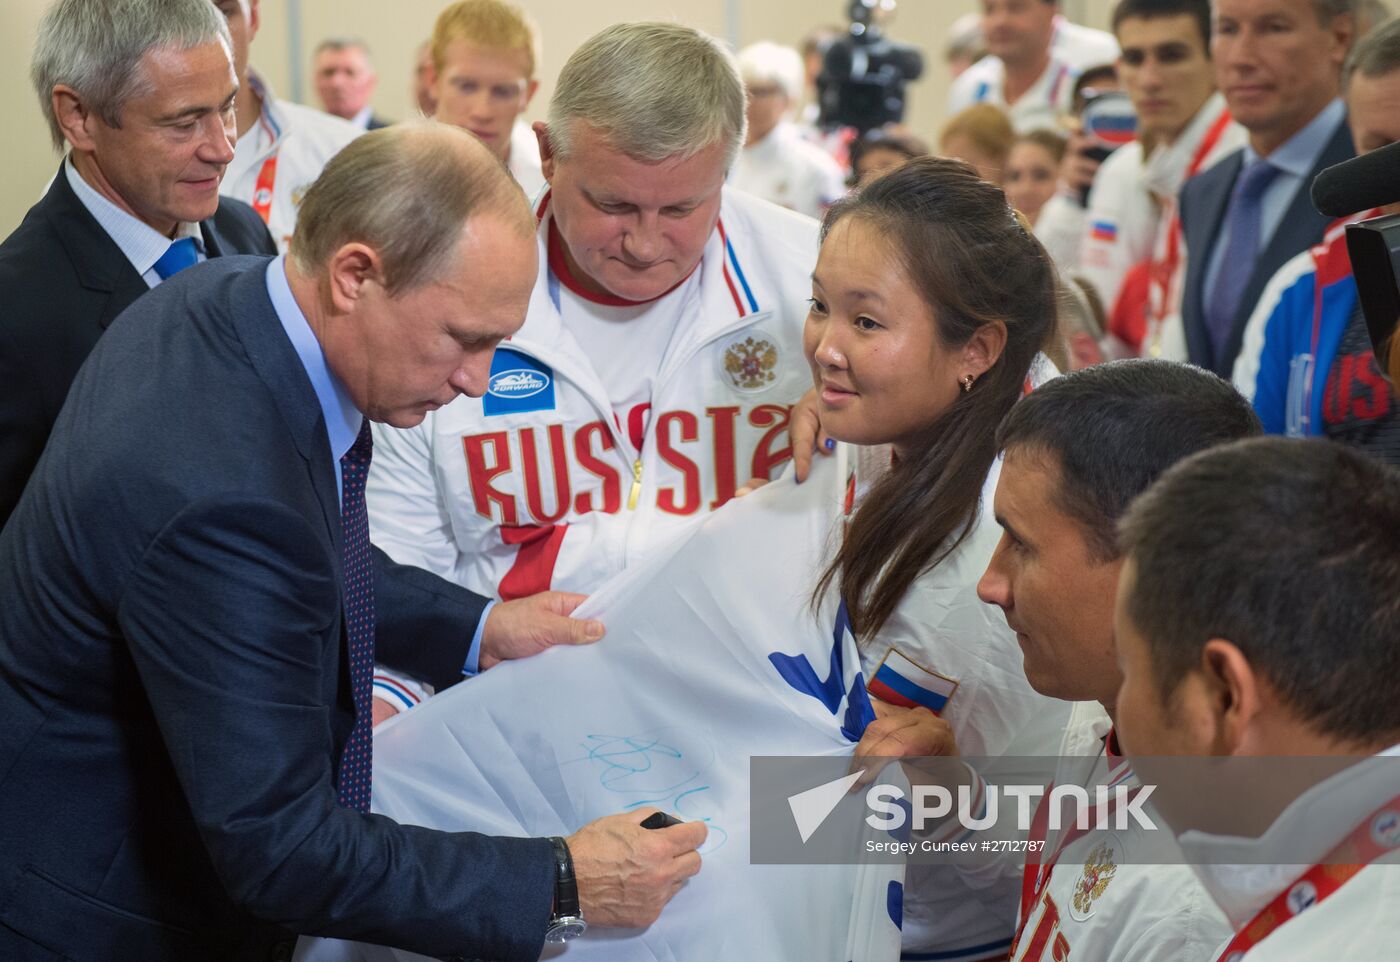 President Putin meets with participants of IWAS World Games 2015